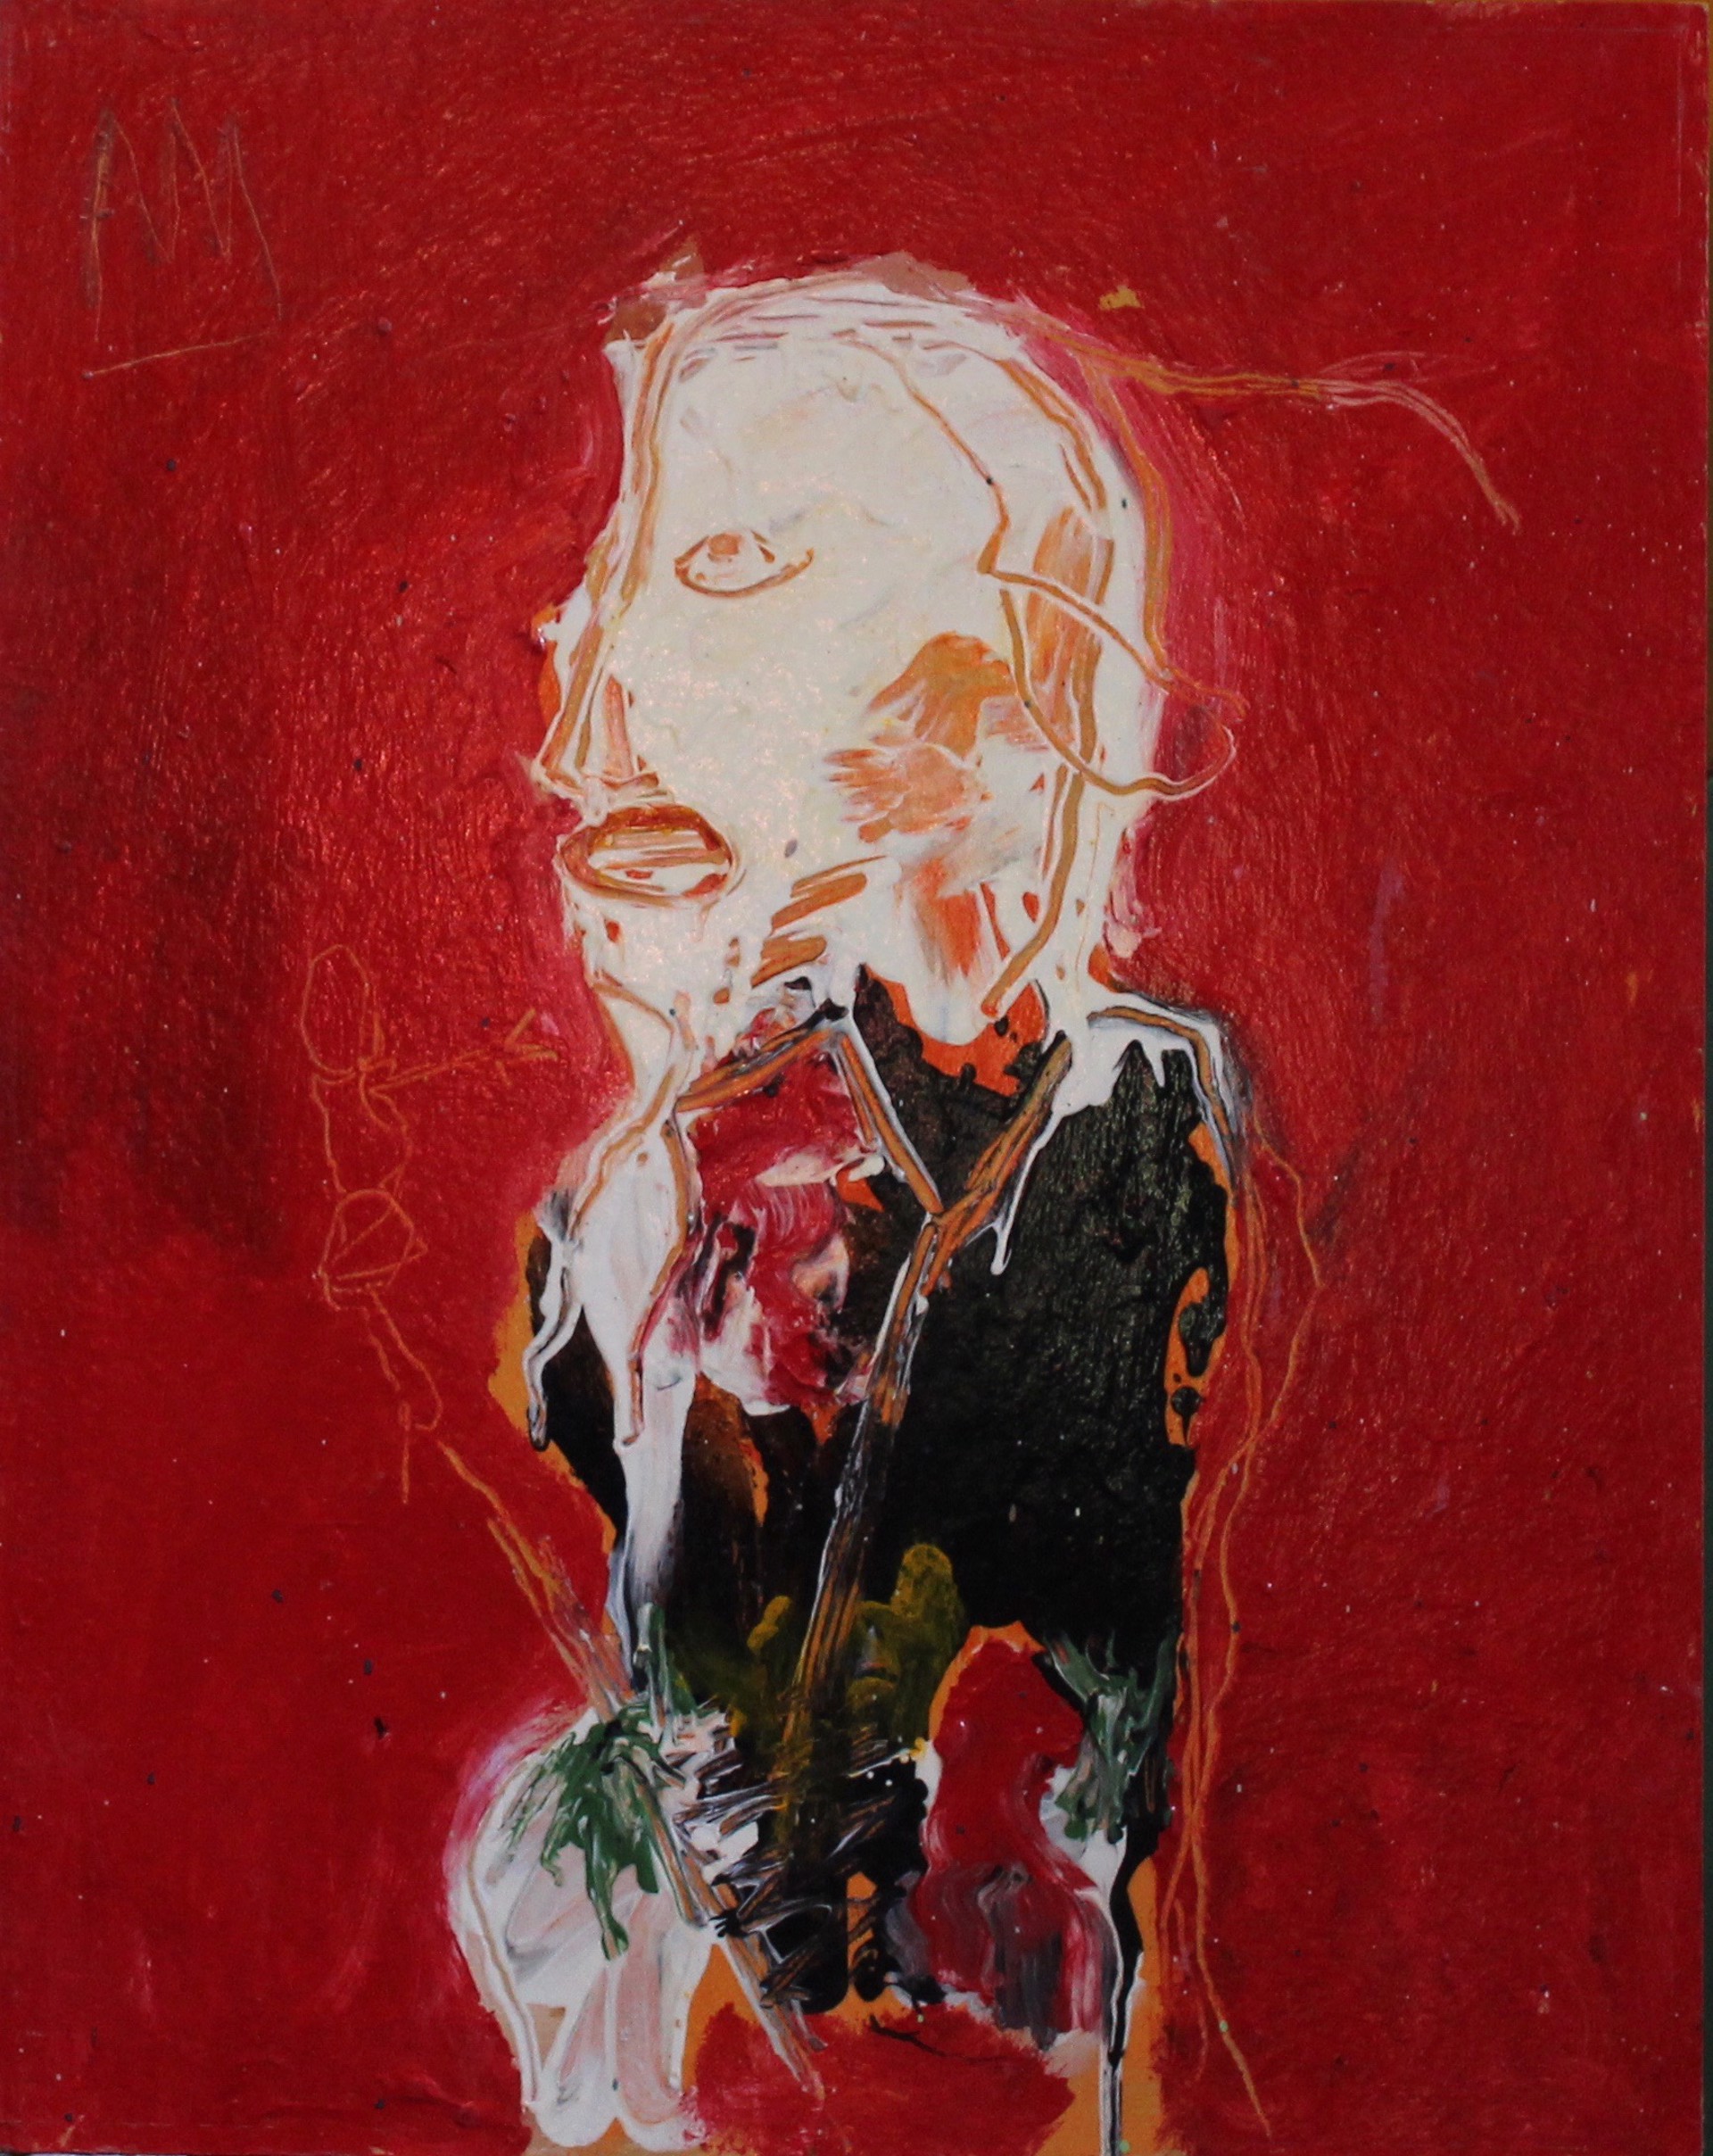 Art Critic with Red Ascot by Michael Snodgrass